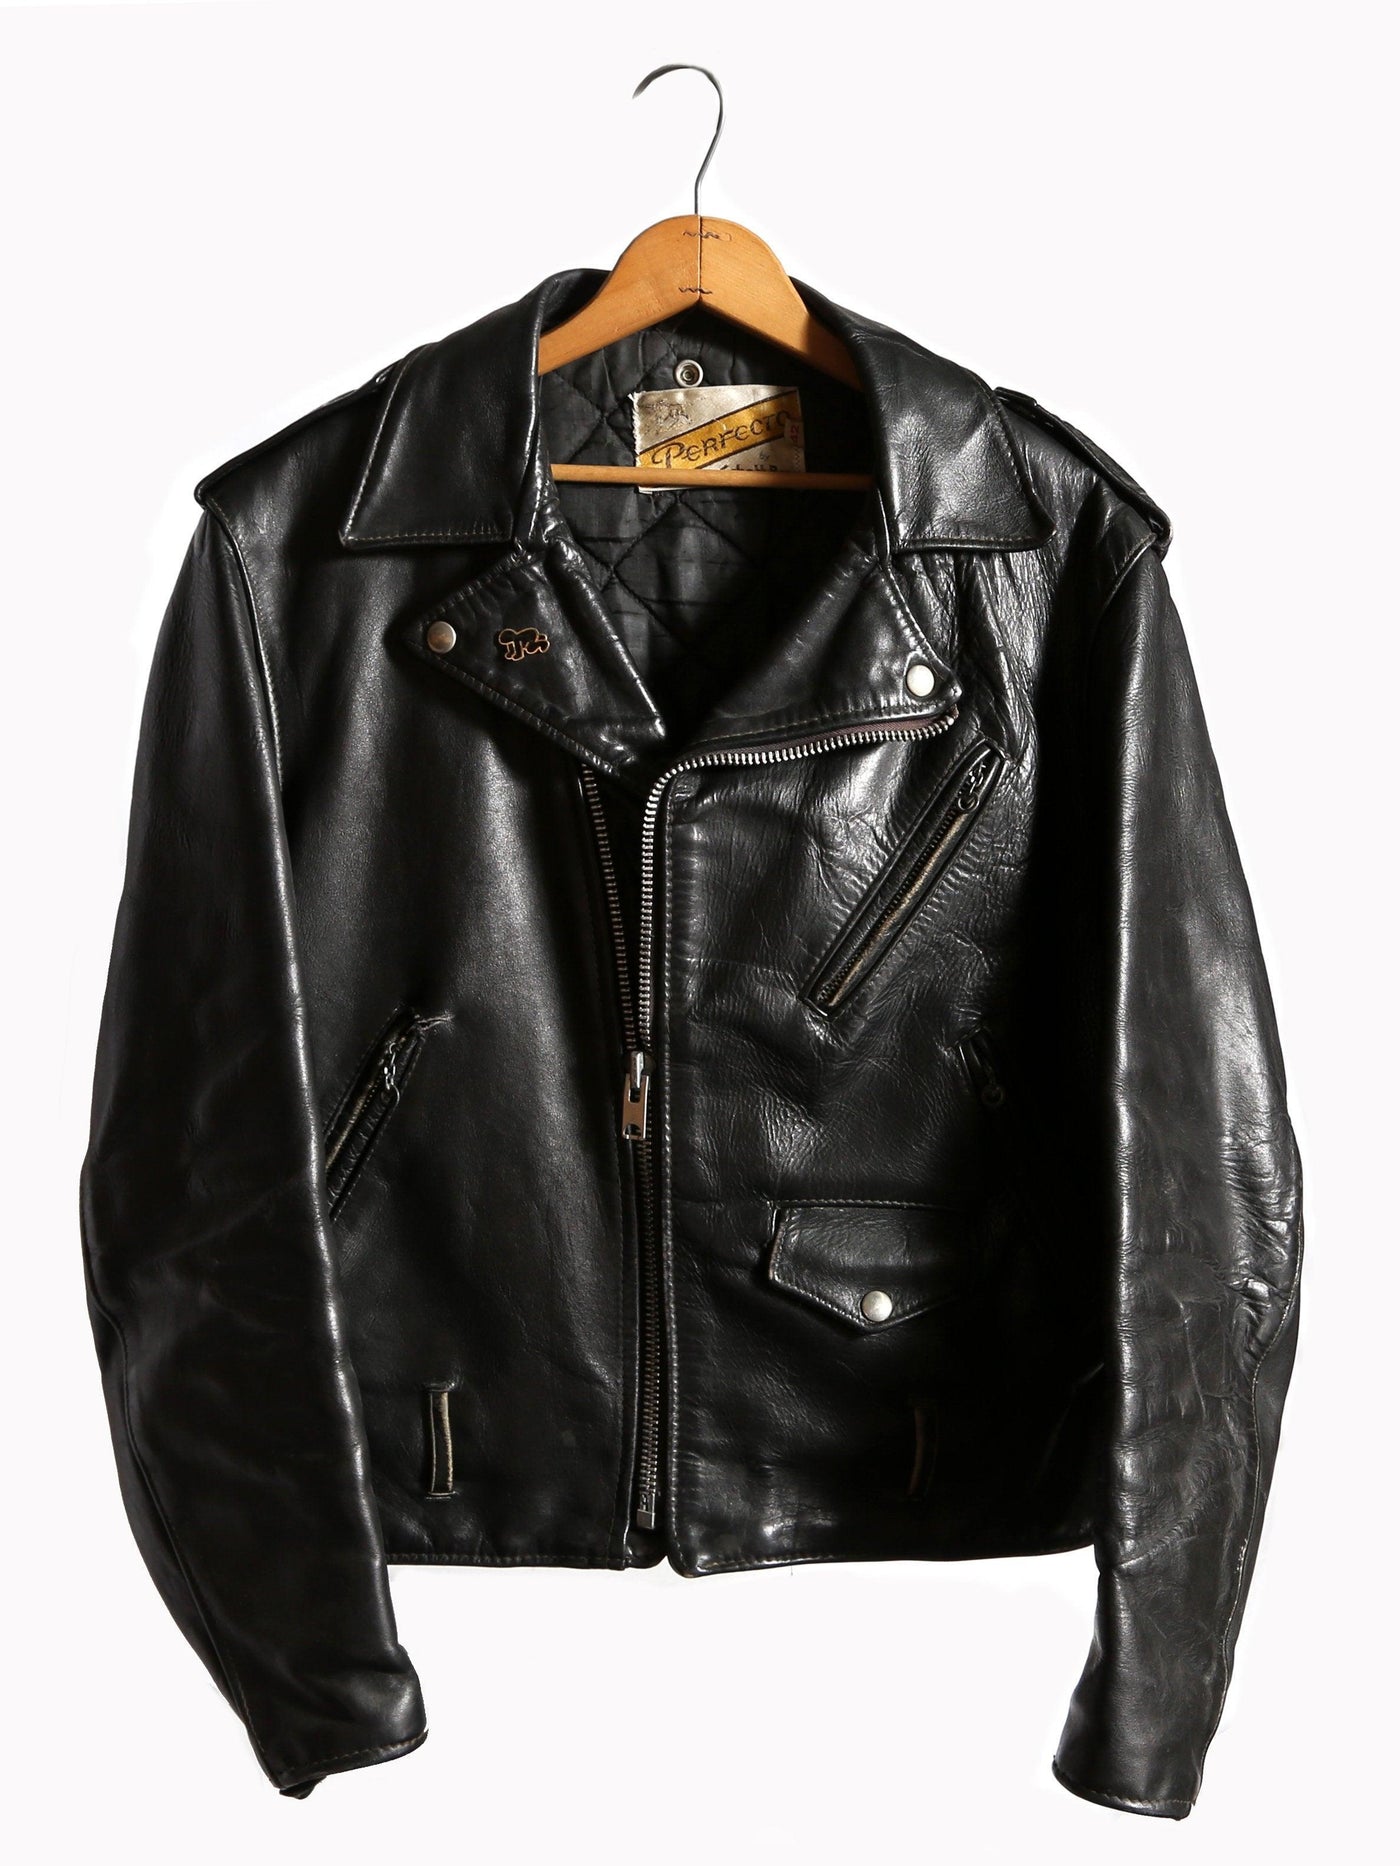 Schott Brothers Perfecto Motorcycle Jacket | Keith Haring | RoGallery